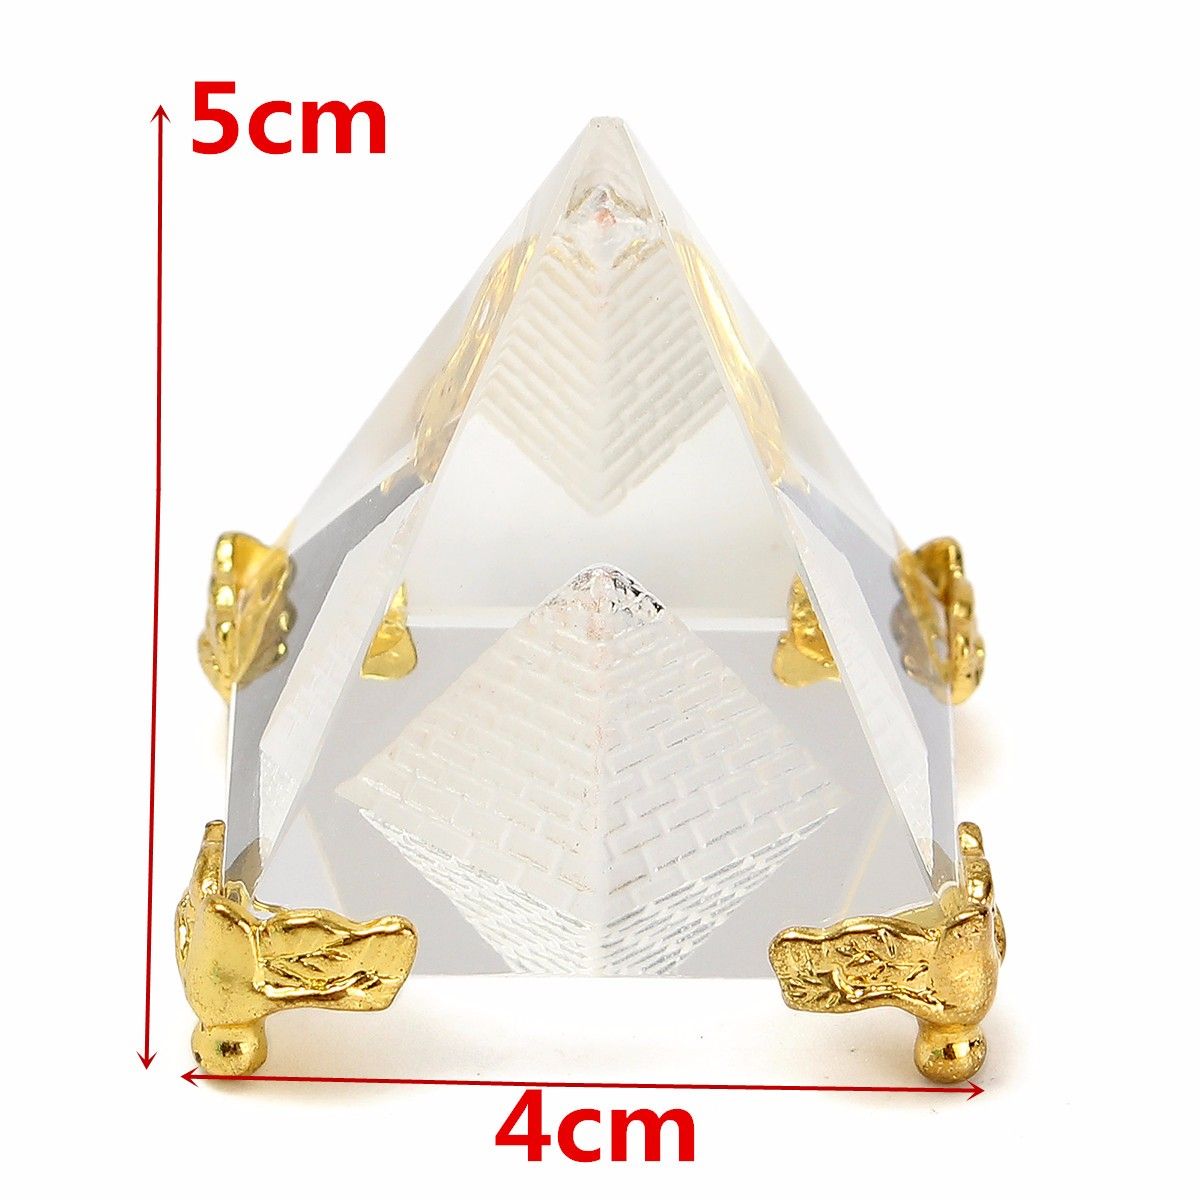 Small-Feng-Shui-Egypt-Egyptian-Crystal-Clear-Pyramid-REIKI-Healing-Prizms-Room-Decorations-1581145